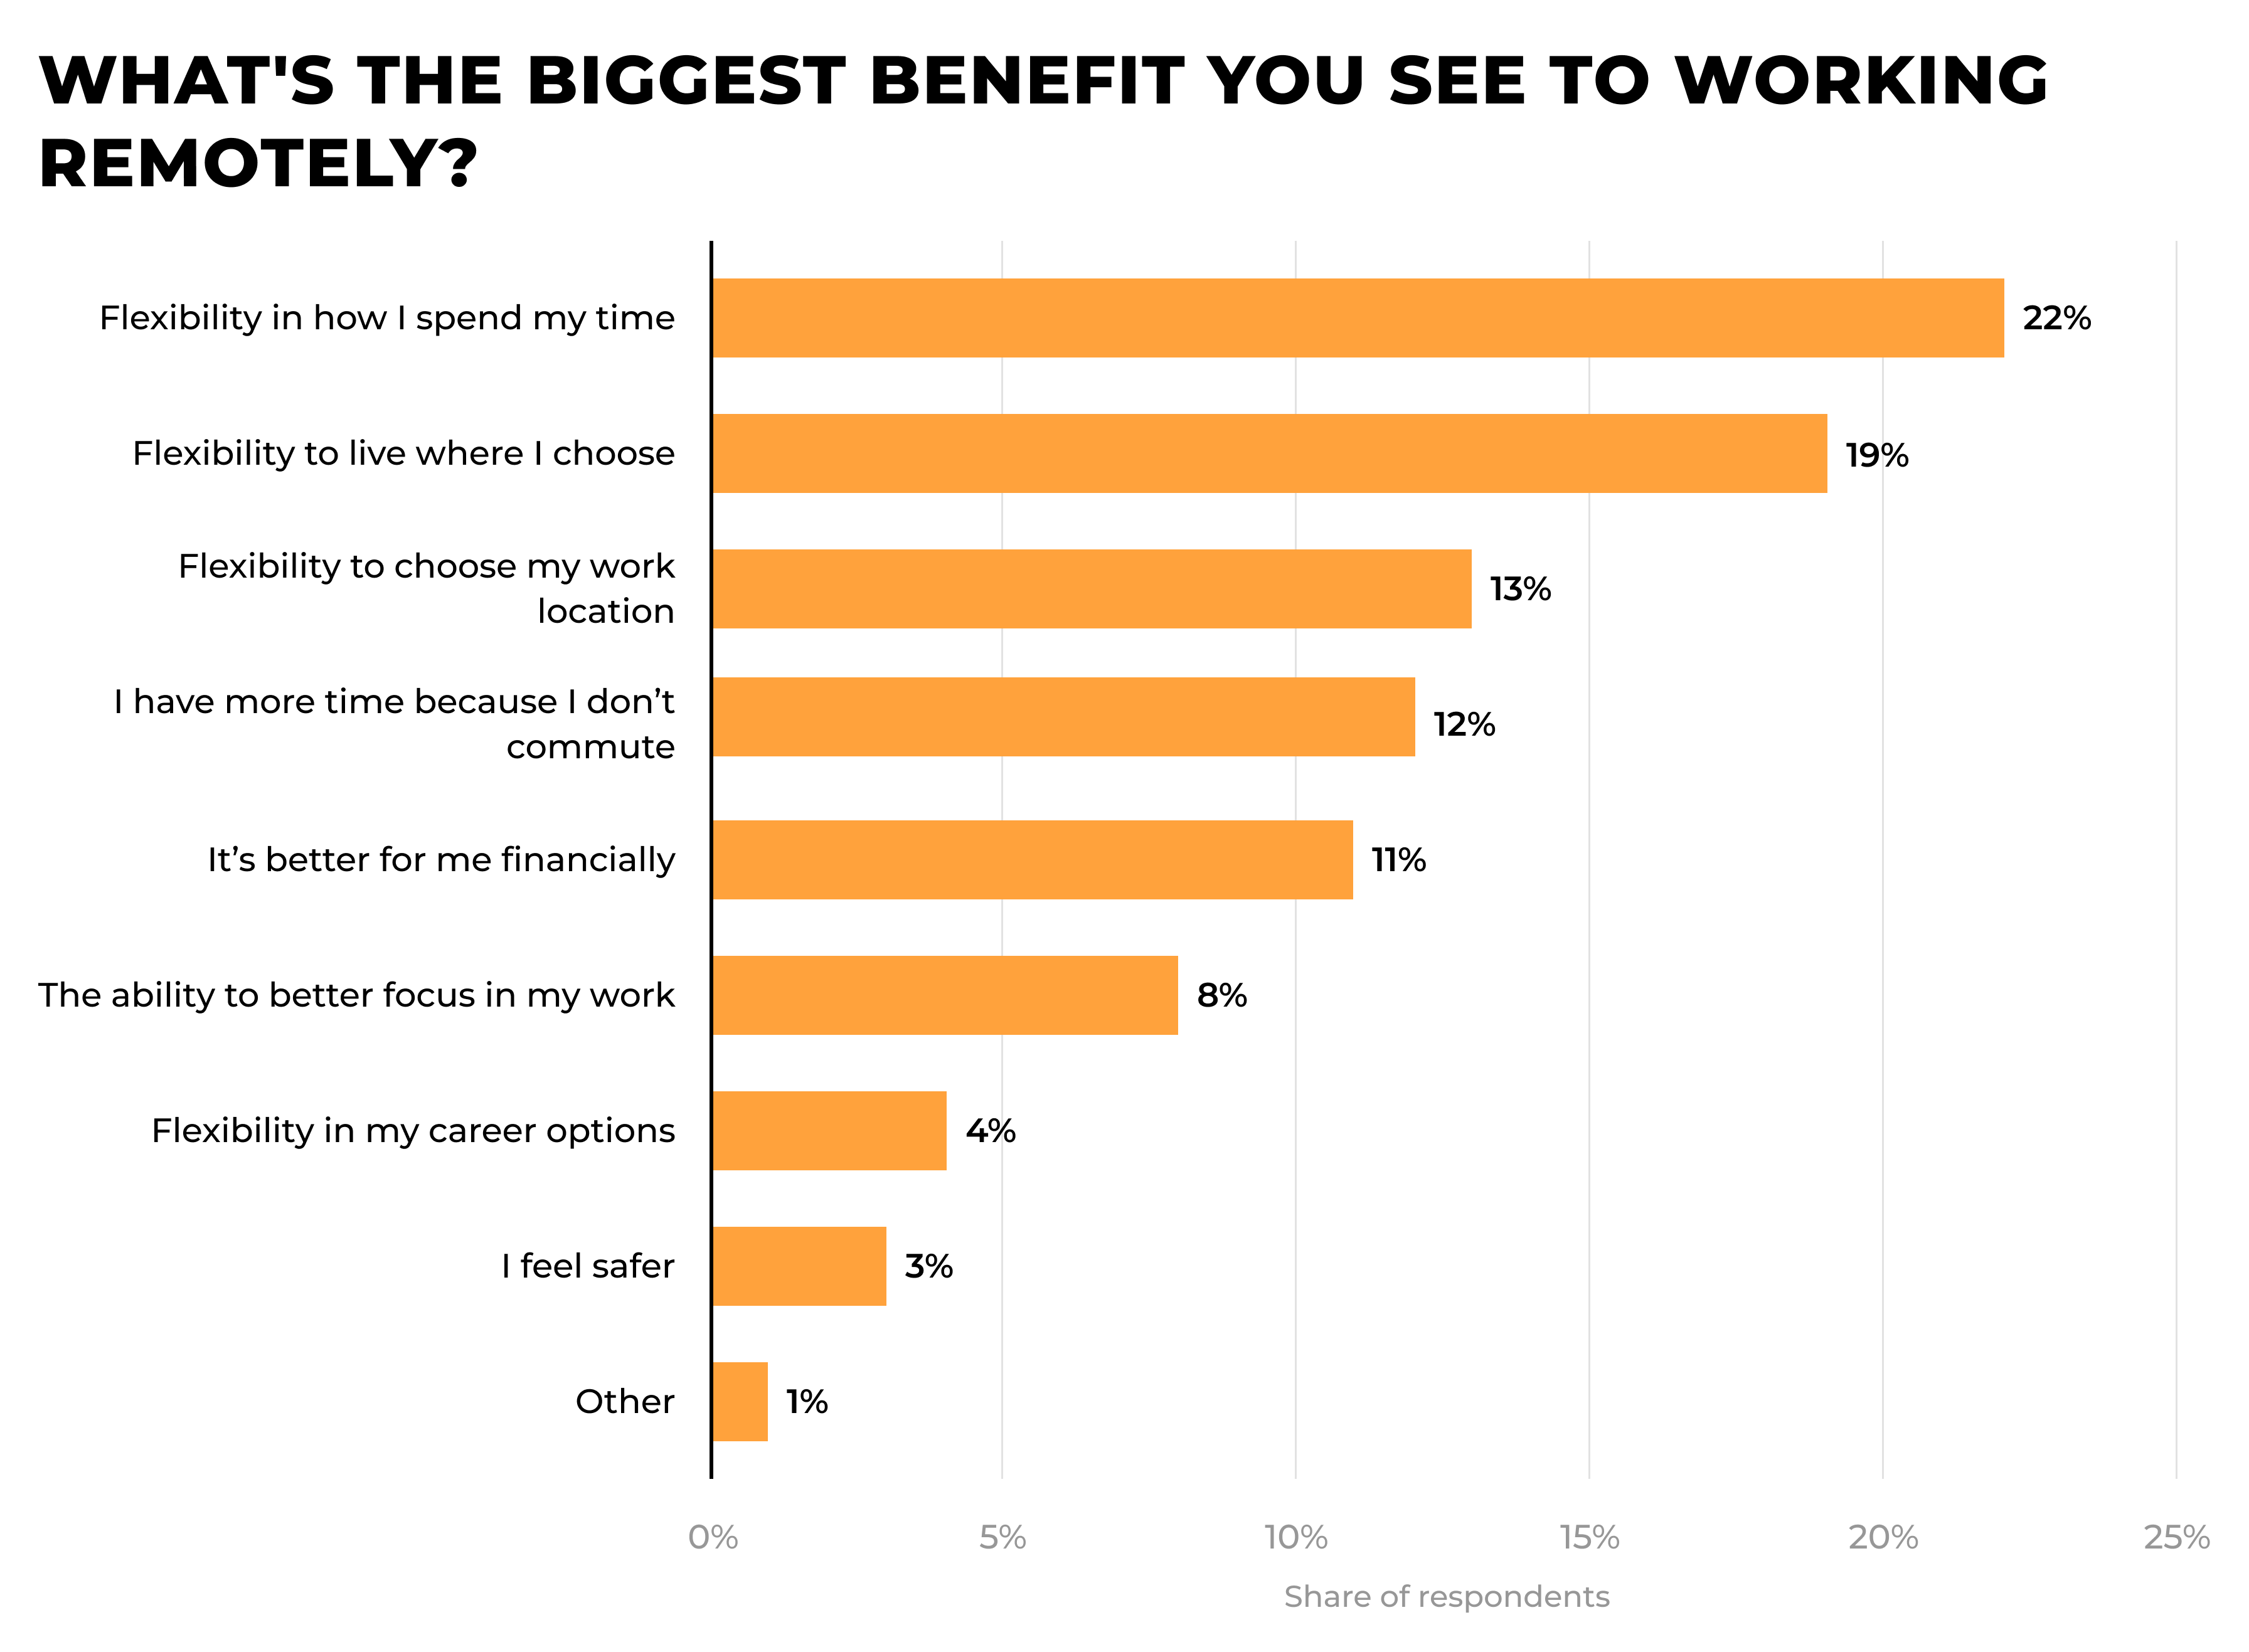 The Greatest Benefits of Working Remotely